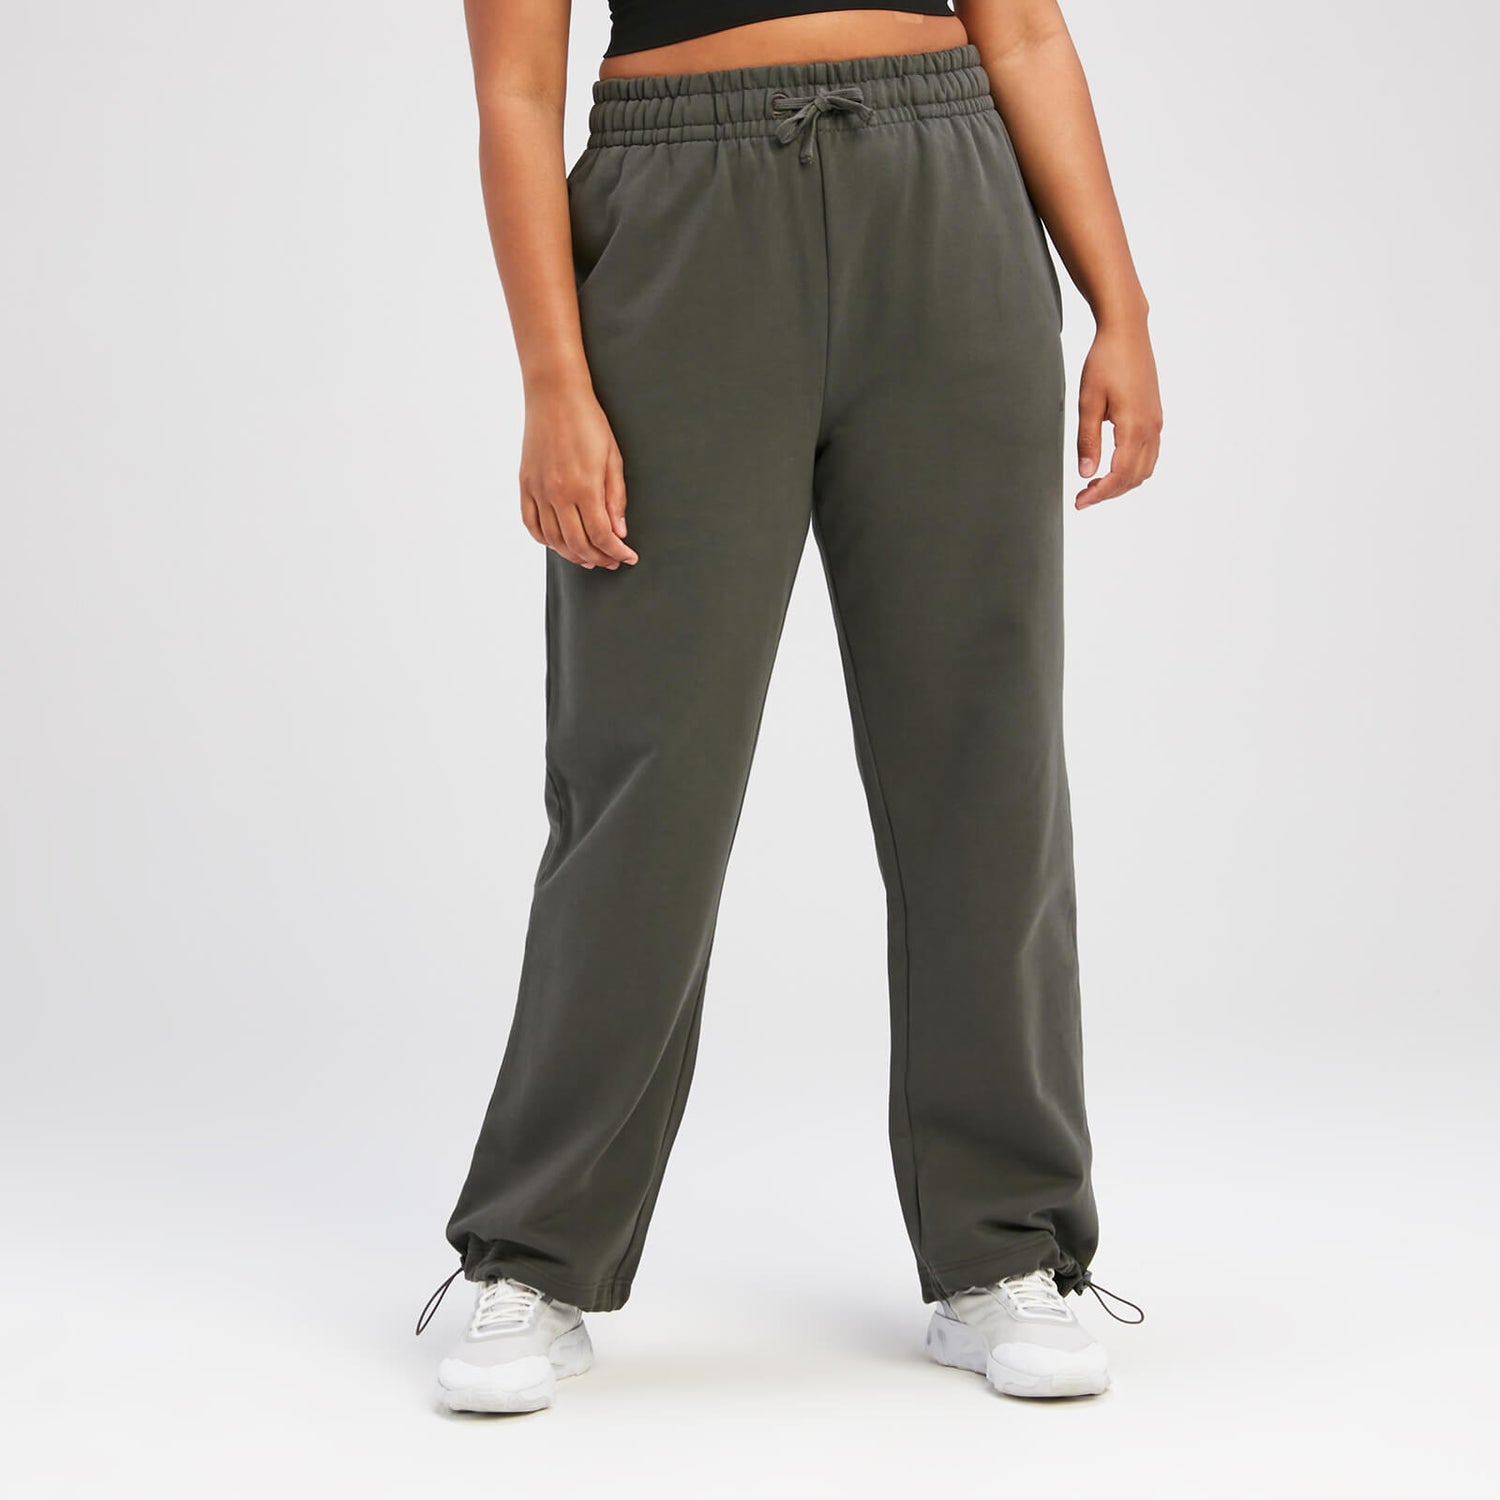 MP Women's Rest Day Joggers - Taupe Green - XS